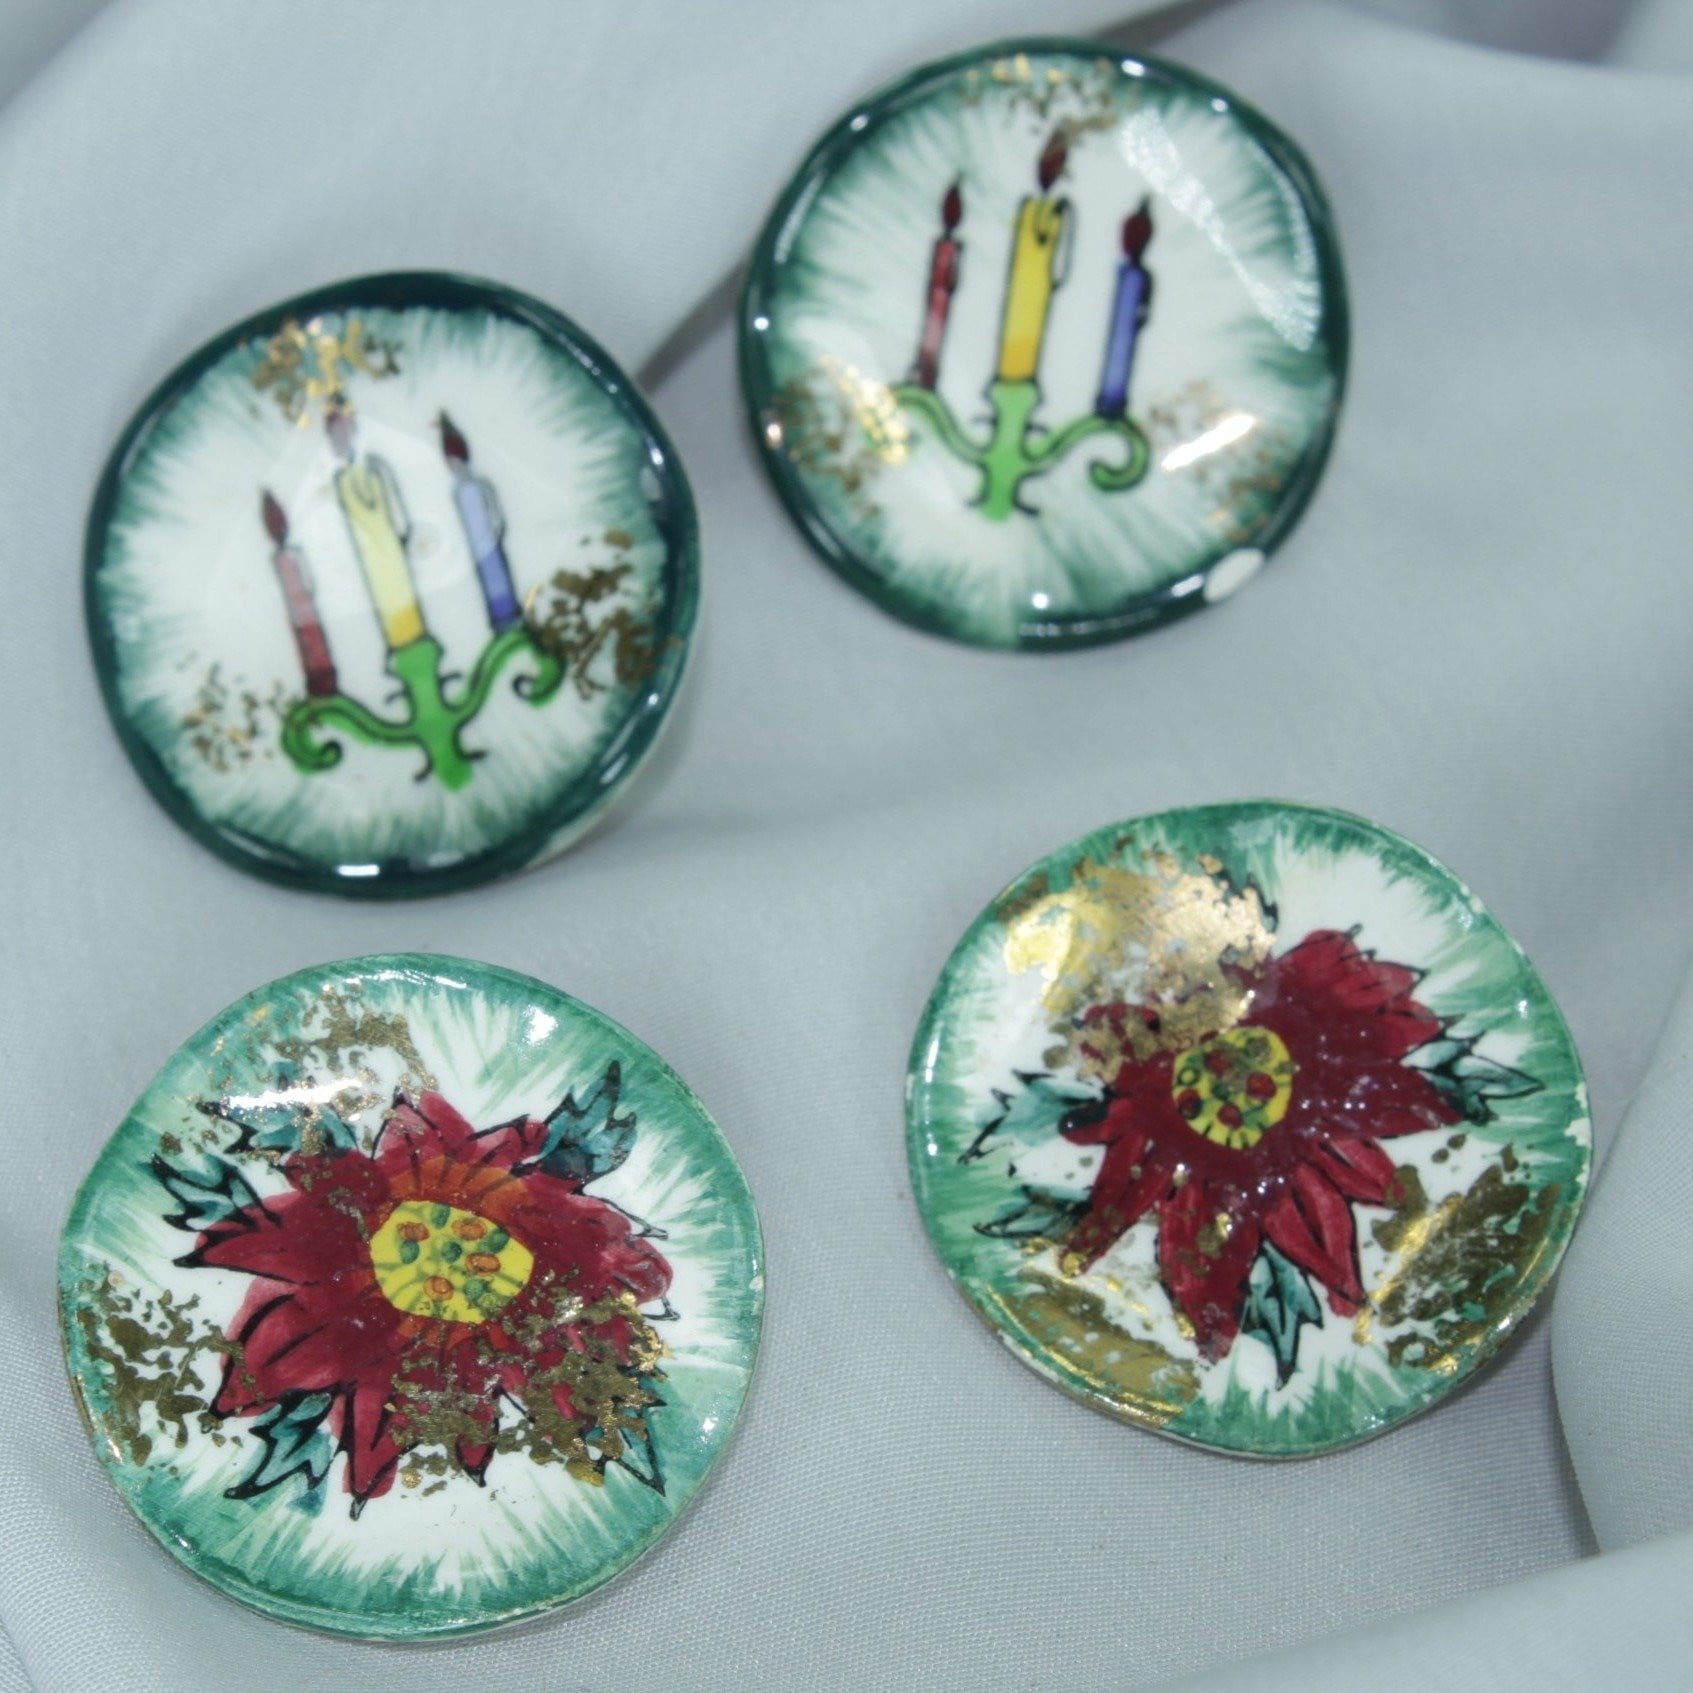 Vintage Earrings Christmas Ceramic Japan Clips Rare Collectibles candles